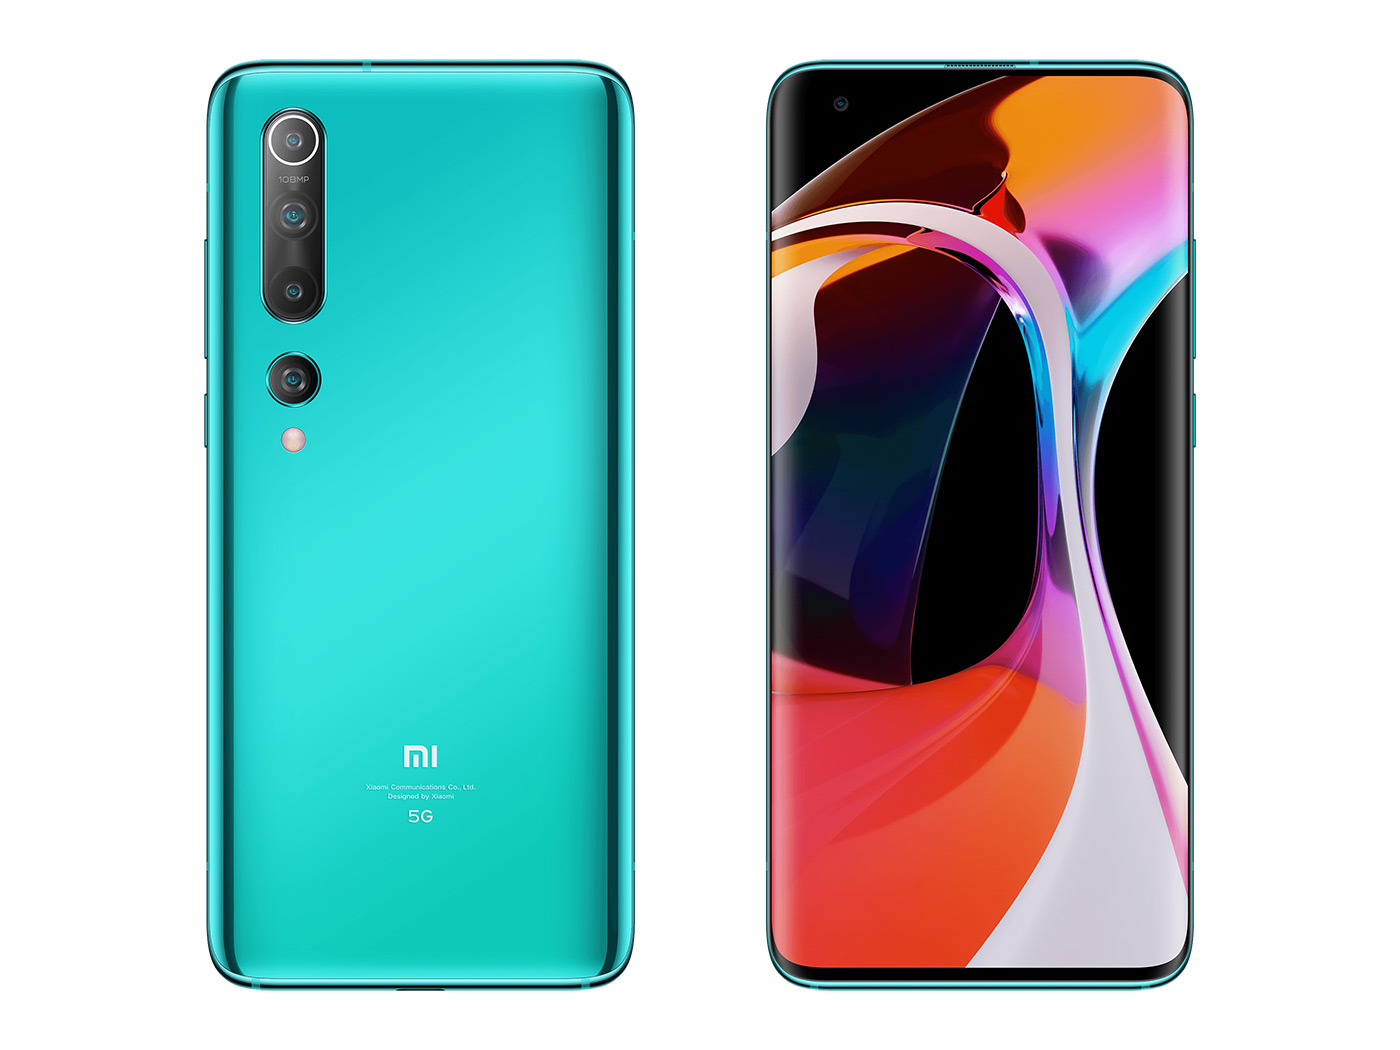 All new items from the presentation of Xiaomi